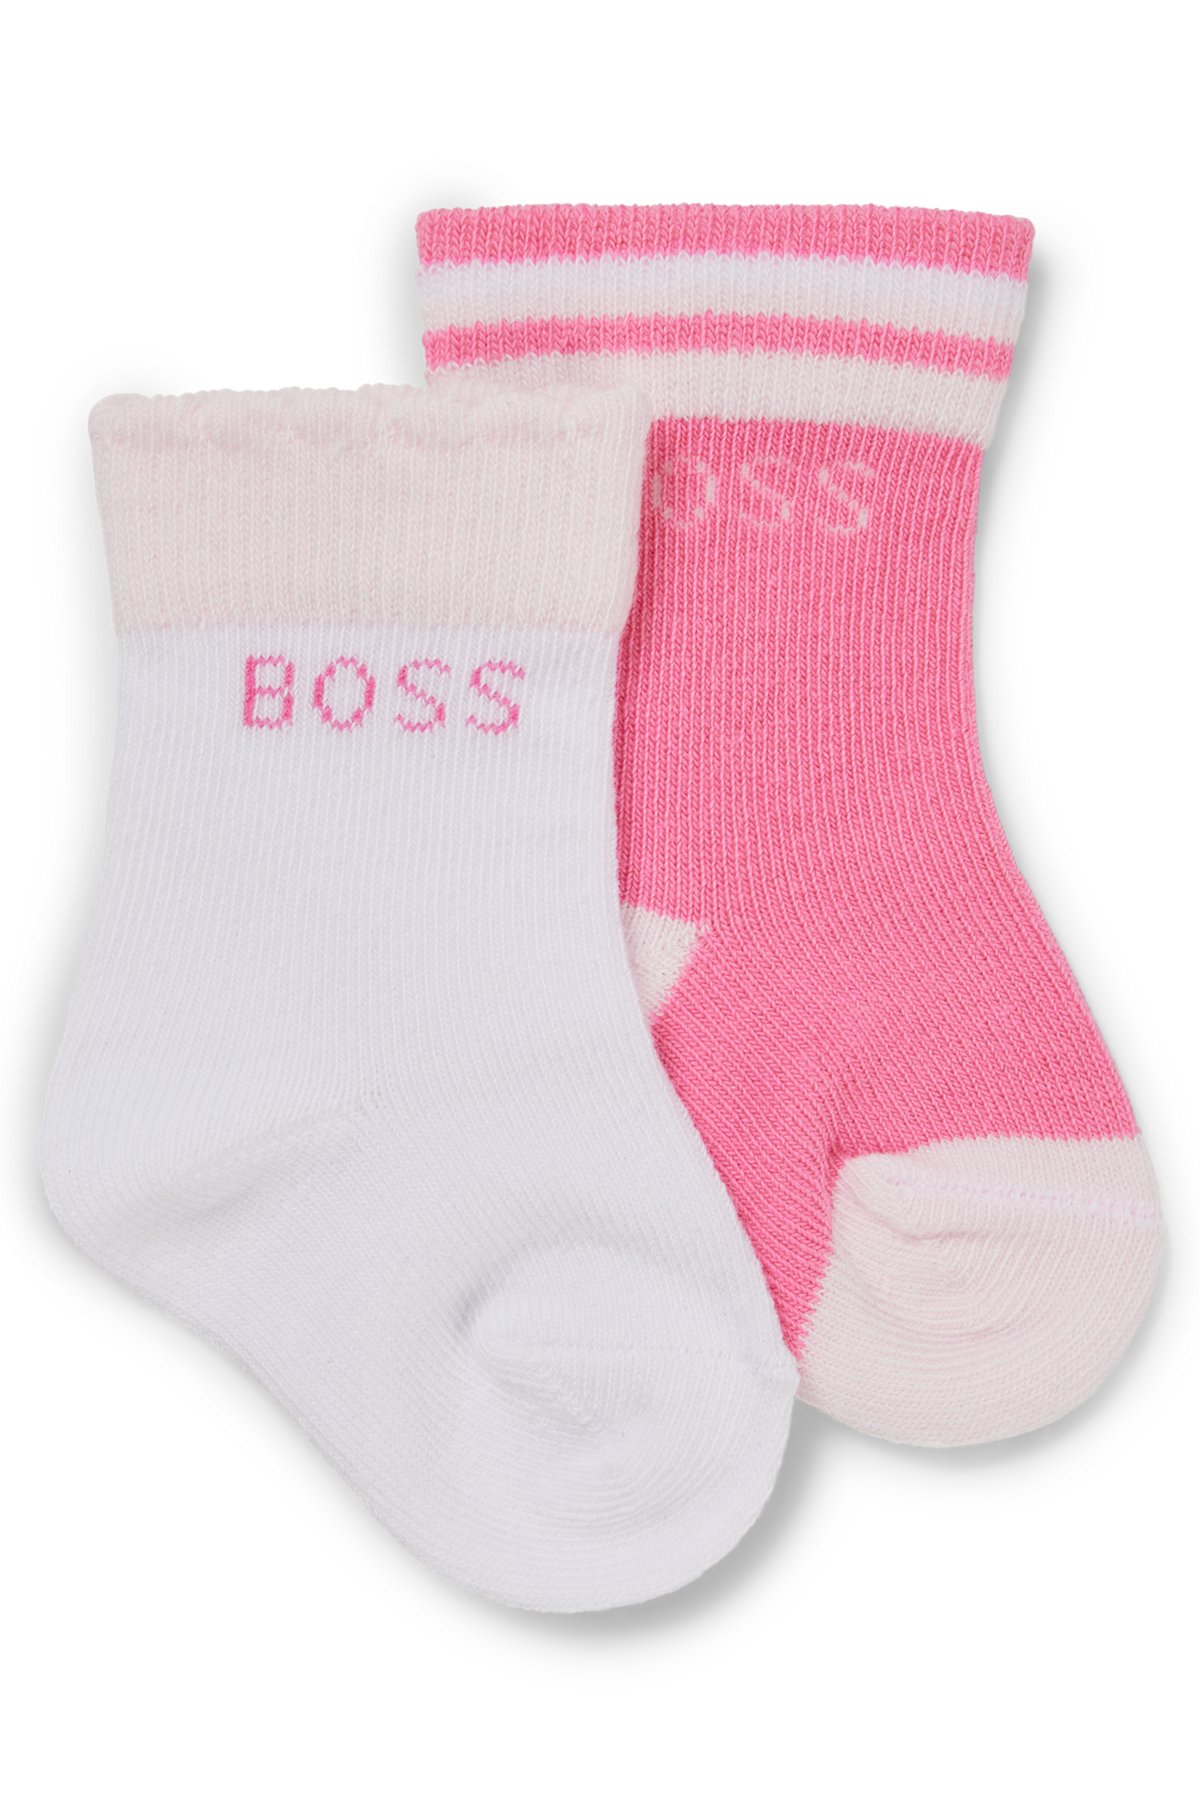 Creek grave krigsskib BOSS - Baby socks in a cotton blend with contrast logo